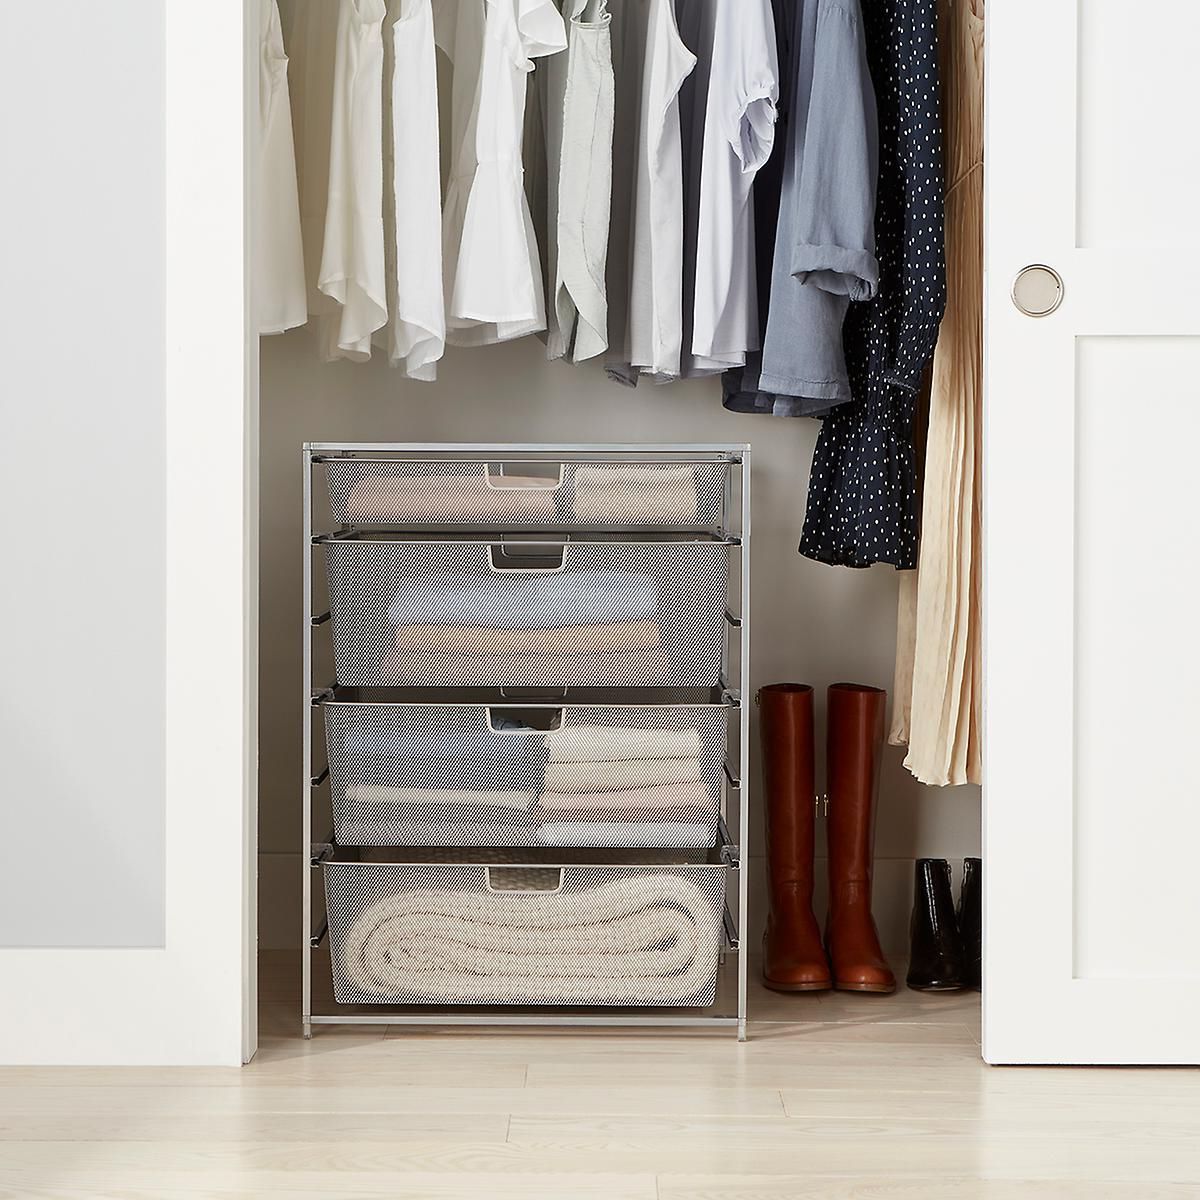 35 Best Closet Organization Ideas To Maximize Space Pertaining To Drawers And Shelves For Wardrobes (Gallery 5 of 20)